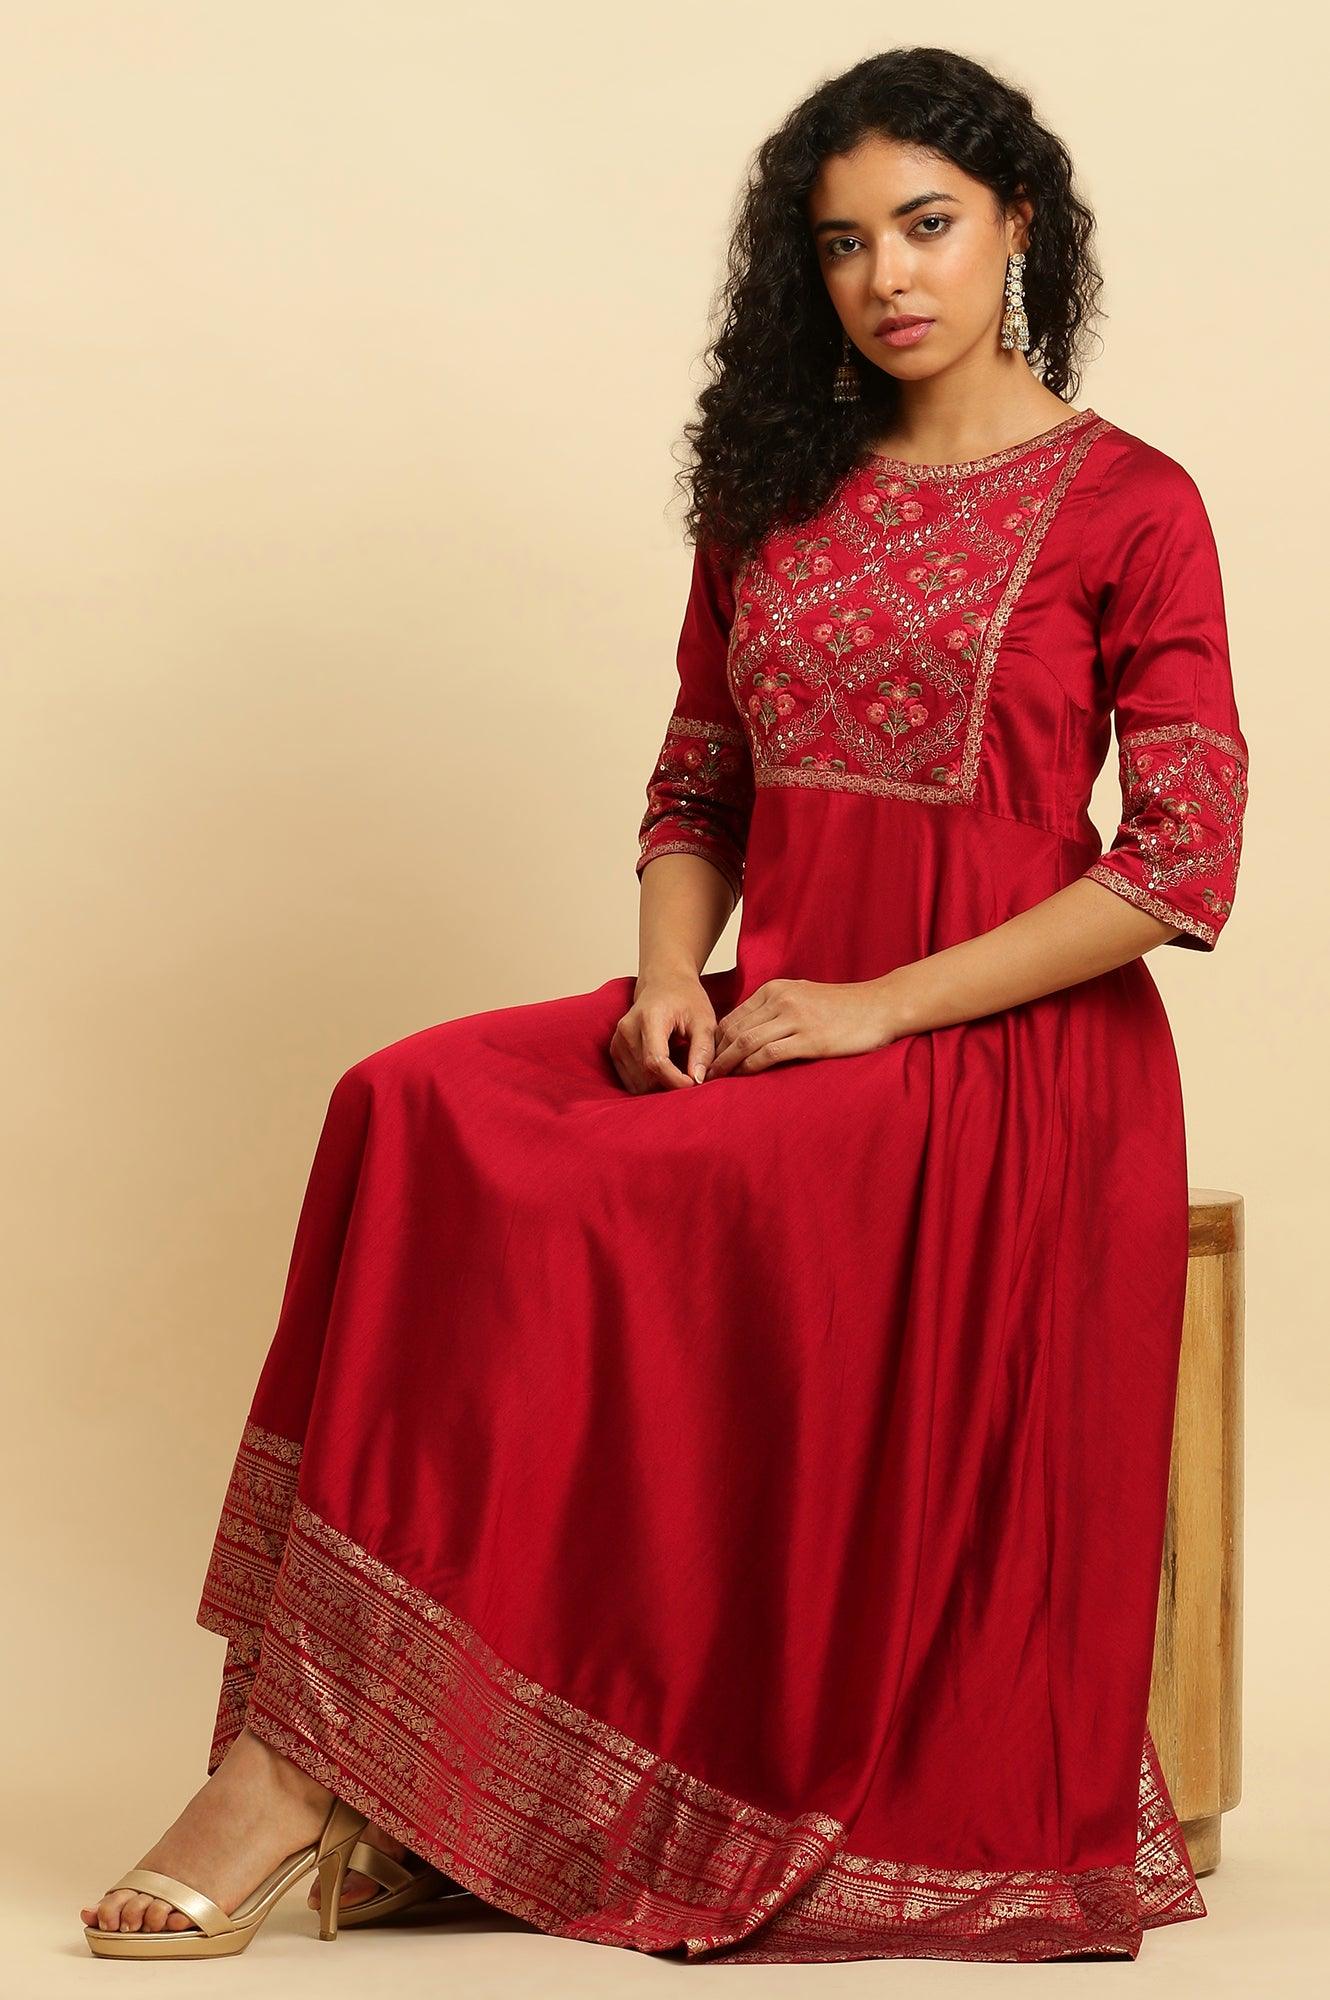 Red Panelled Embroidered Festive Dress - wforwoman